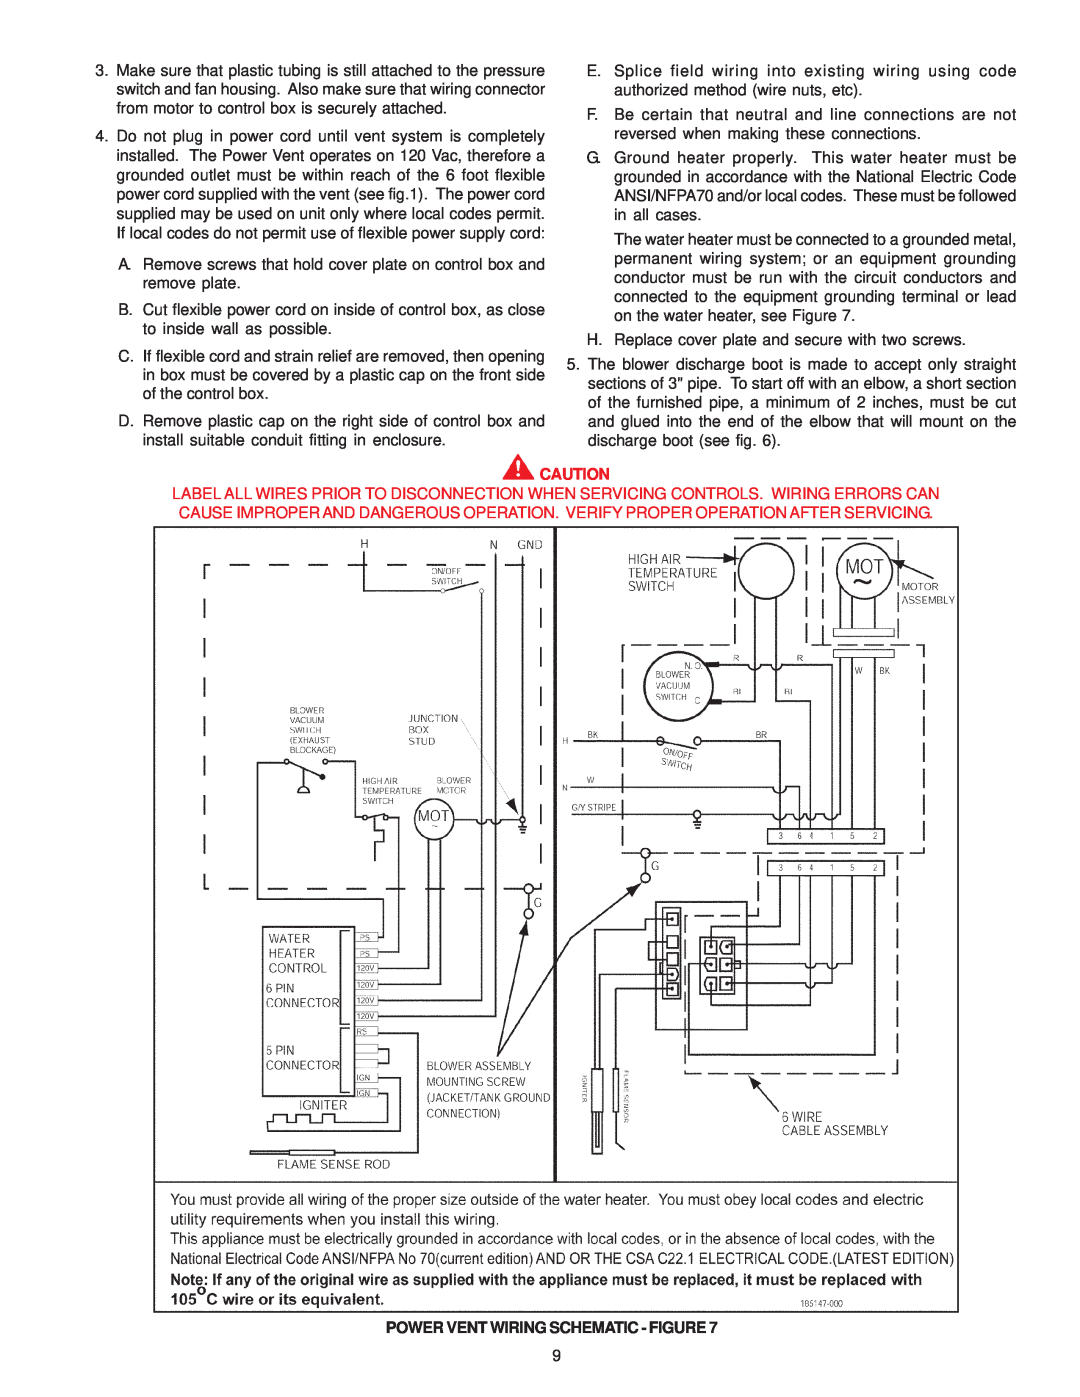 A.O. Smith GPS-75 owner manual Power Vent Wiring Schematic - Figure 